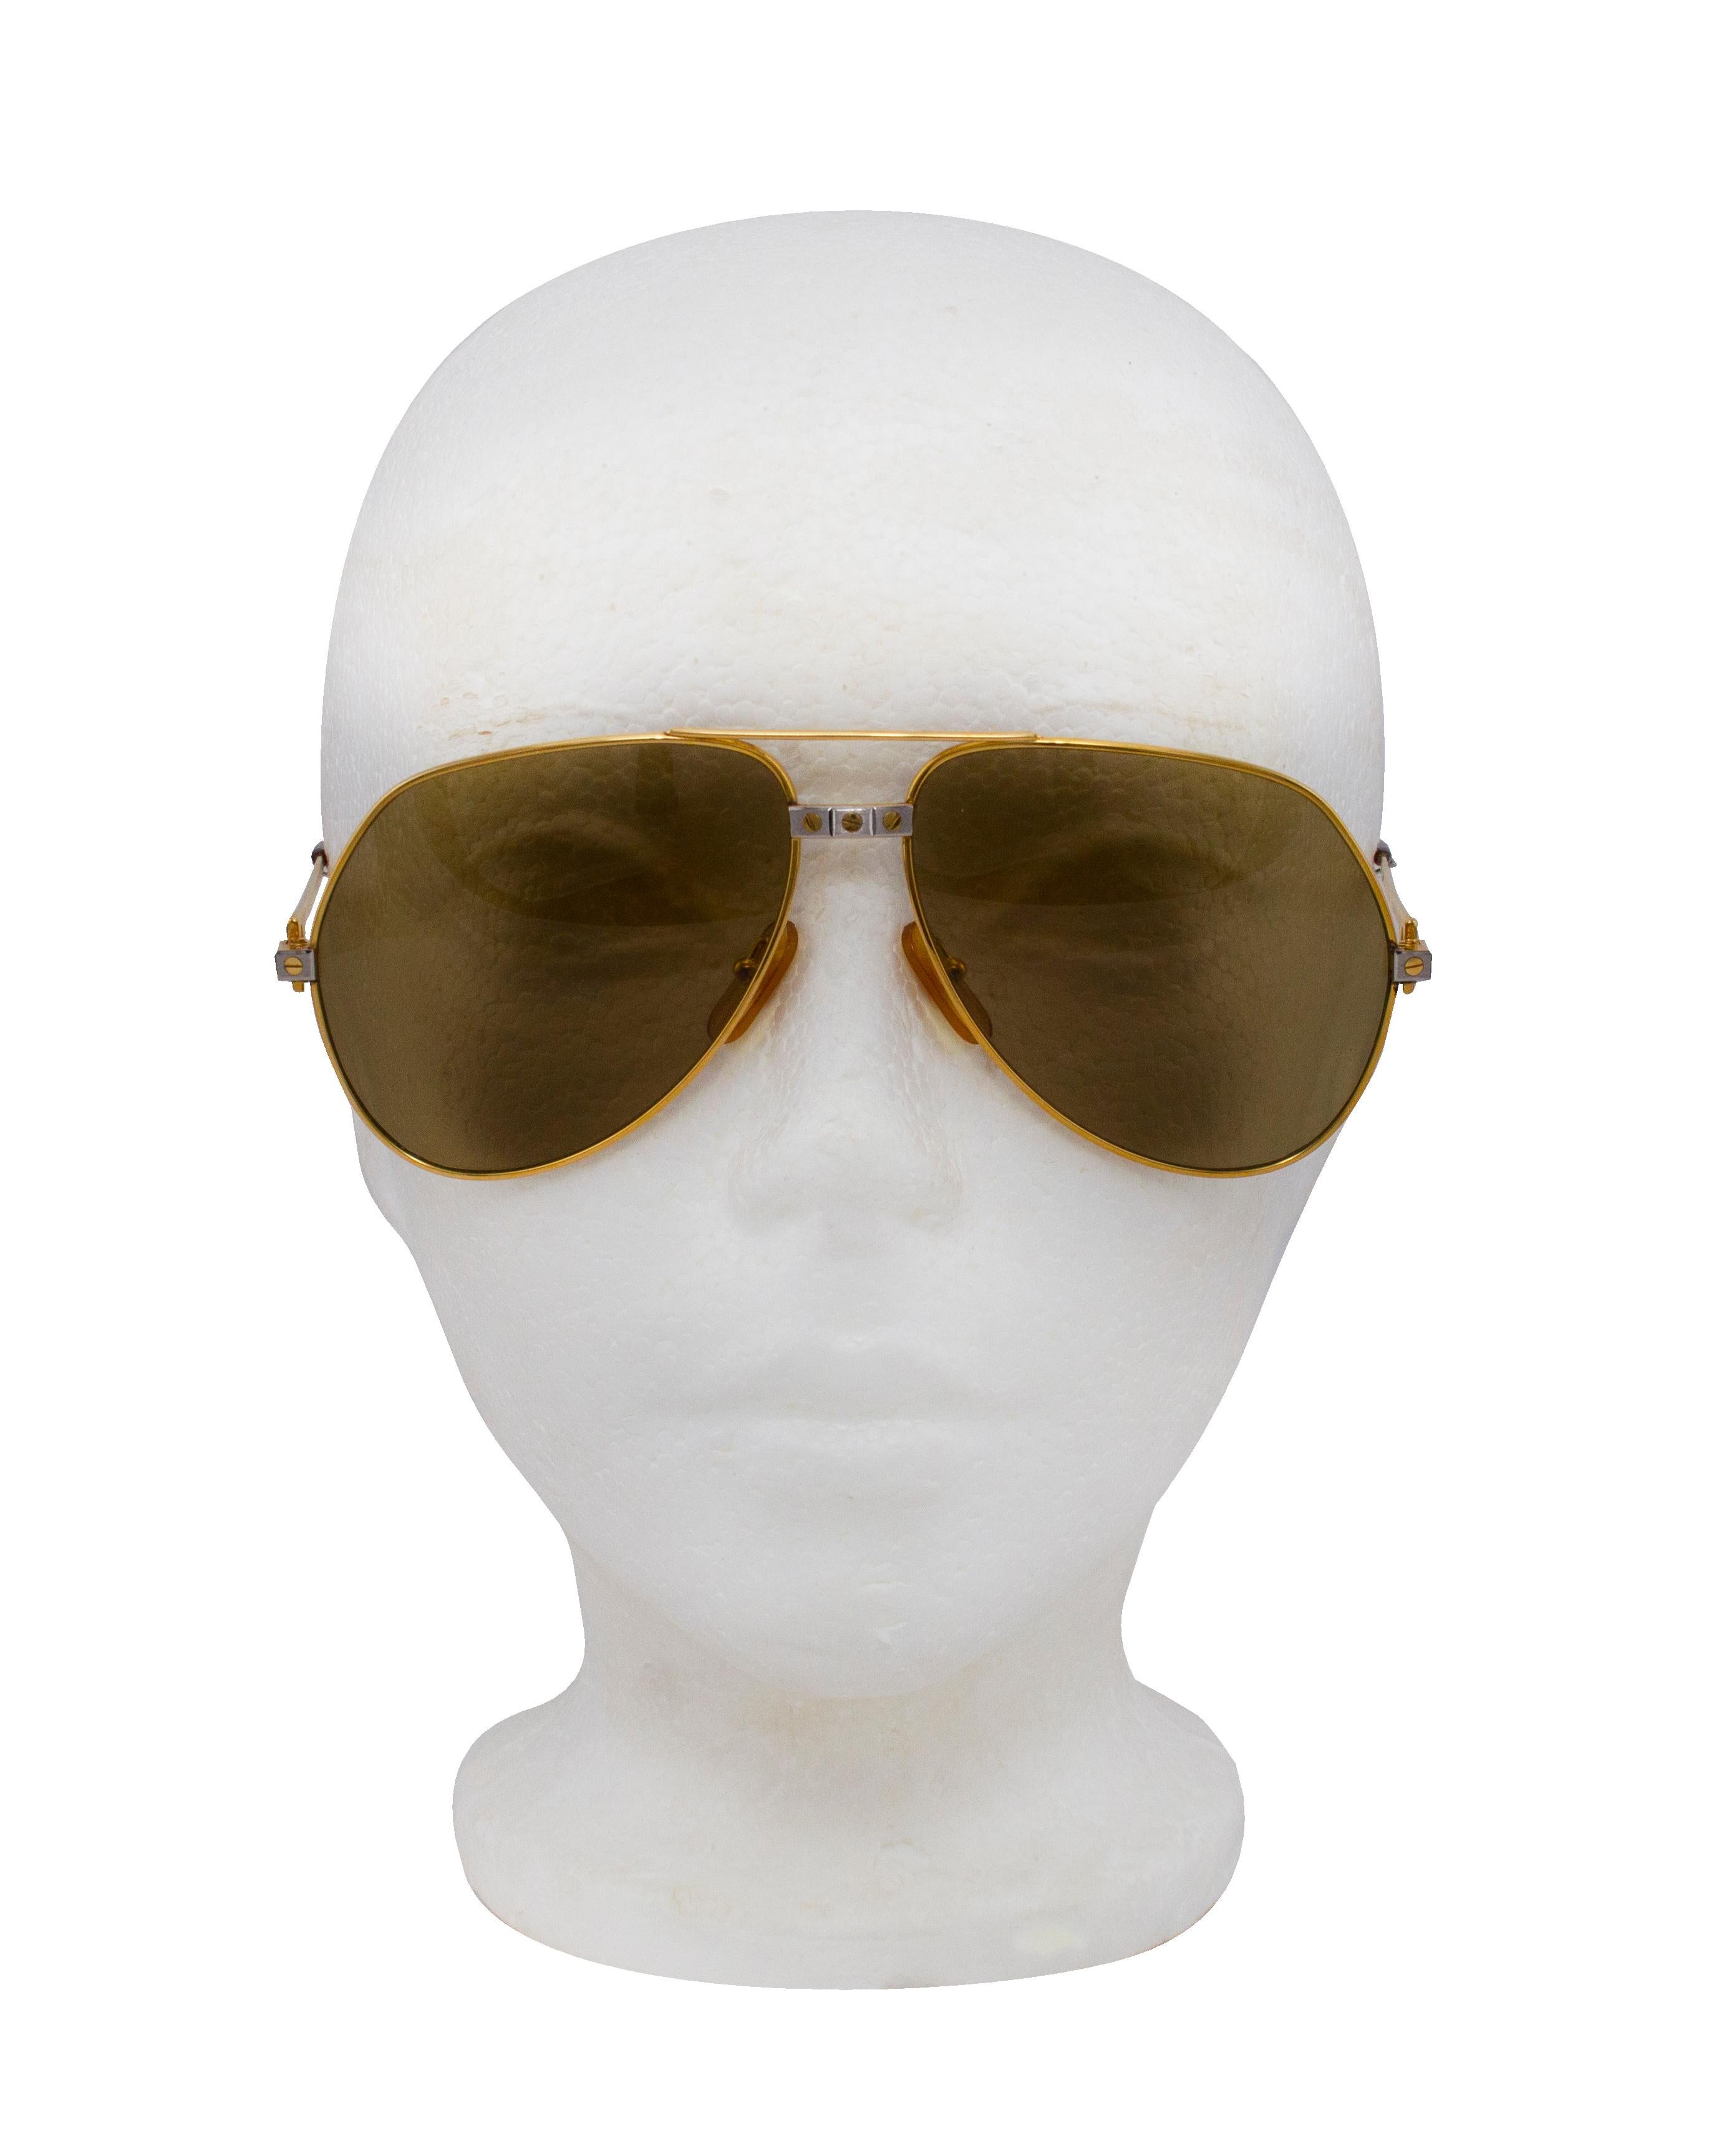 These Cartier aviators are the ultimate pair of vintage sunglasses. Dating from the 1980s, these are the Romance Santos aviators. Gold frame and arms with Cartier screw details on the bridge and temples in a mix of silver and gold. A backwards 'C'